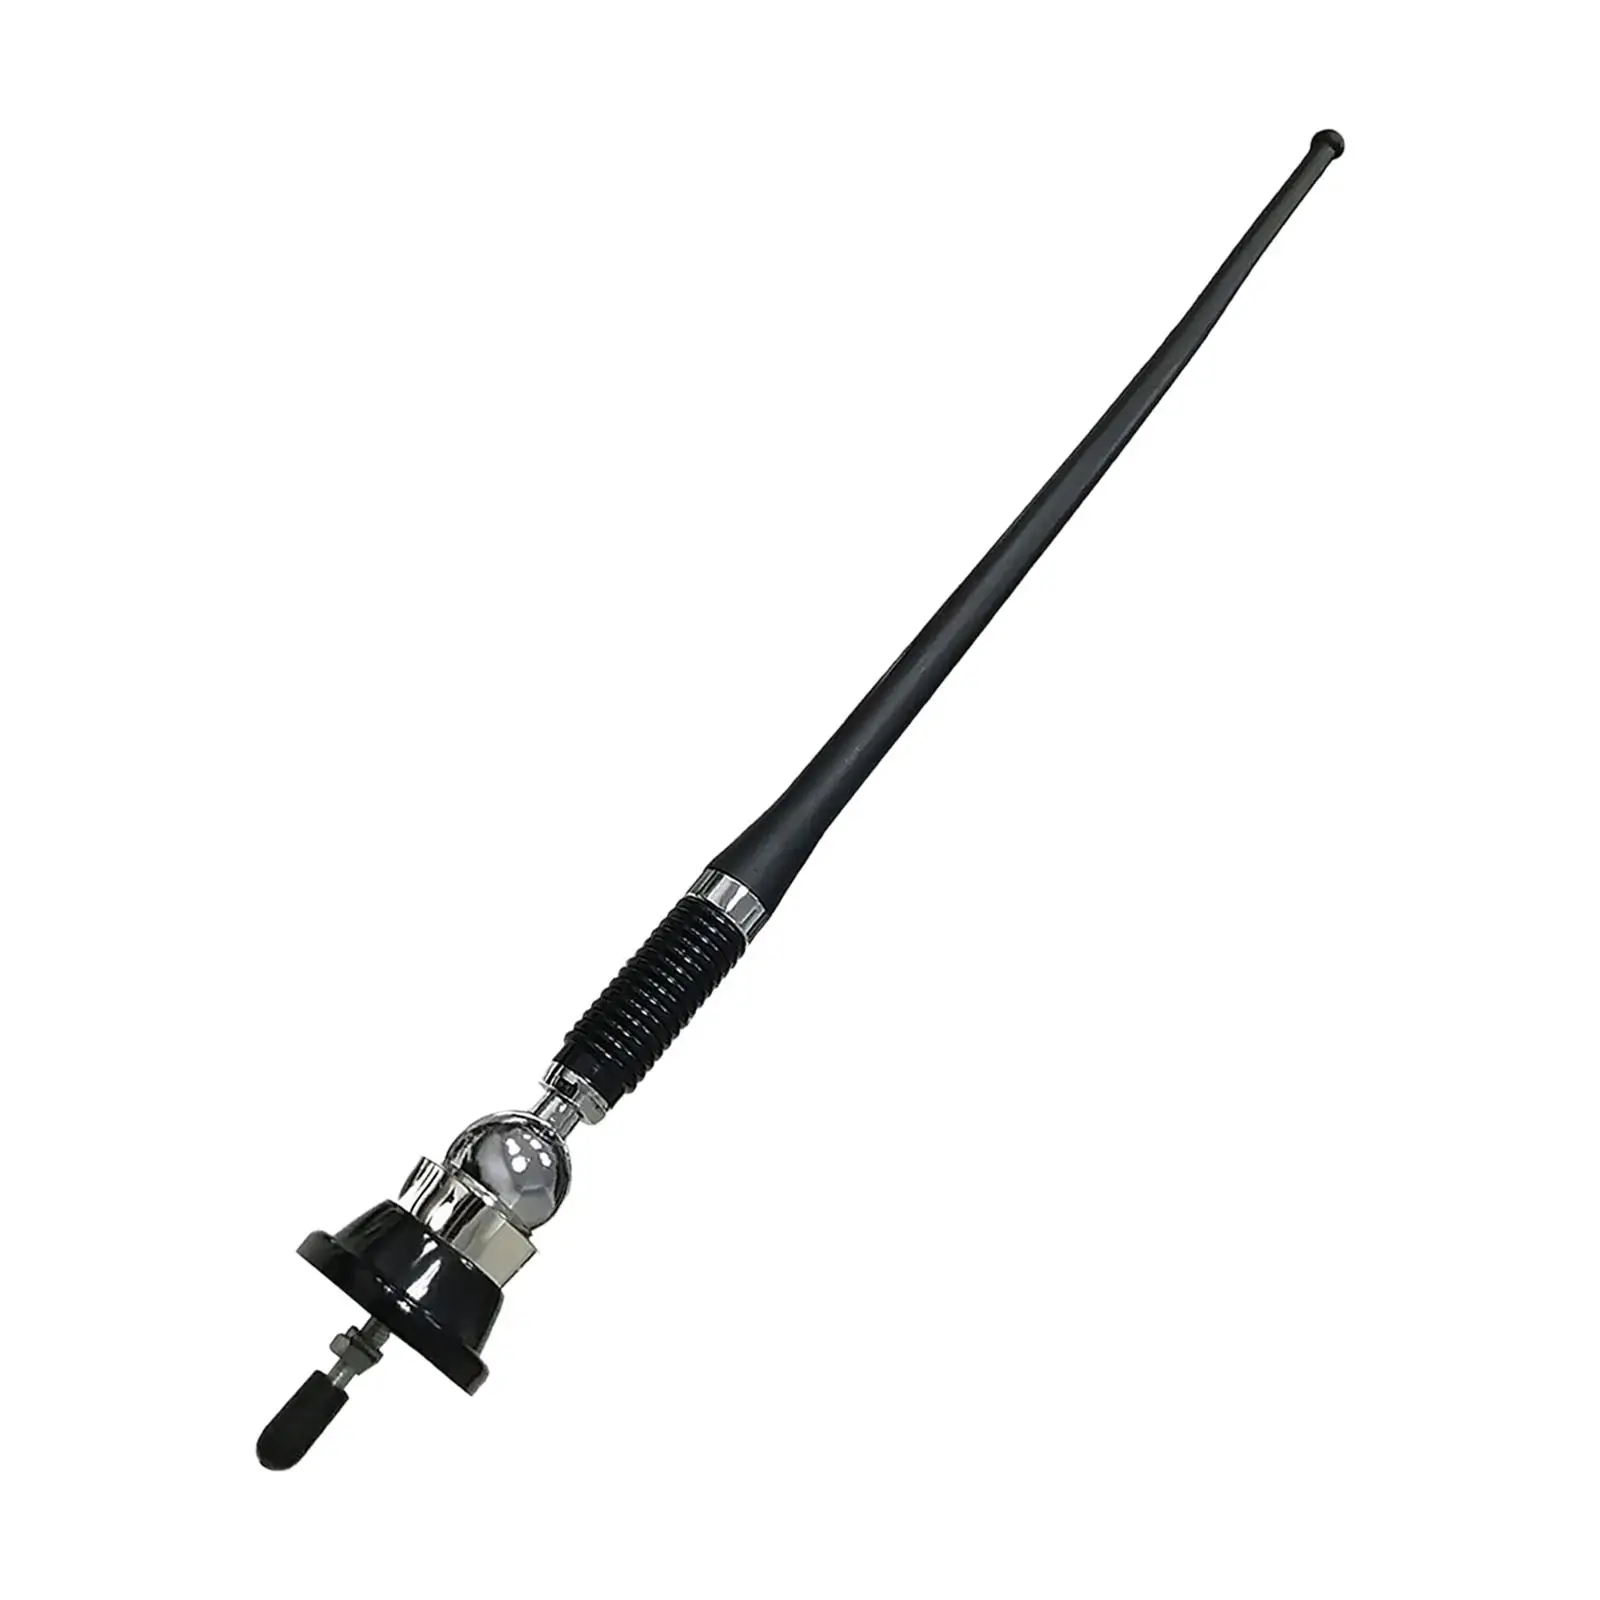 Universal Car Radio Antenna AM FM Accessory Strong Signal Stereo 180 Rotation Angle Adjustable Roof Mast for SUV Motorcycle